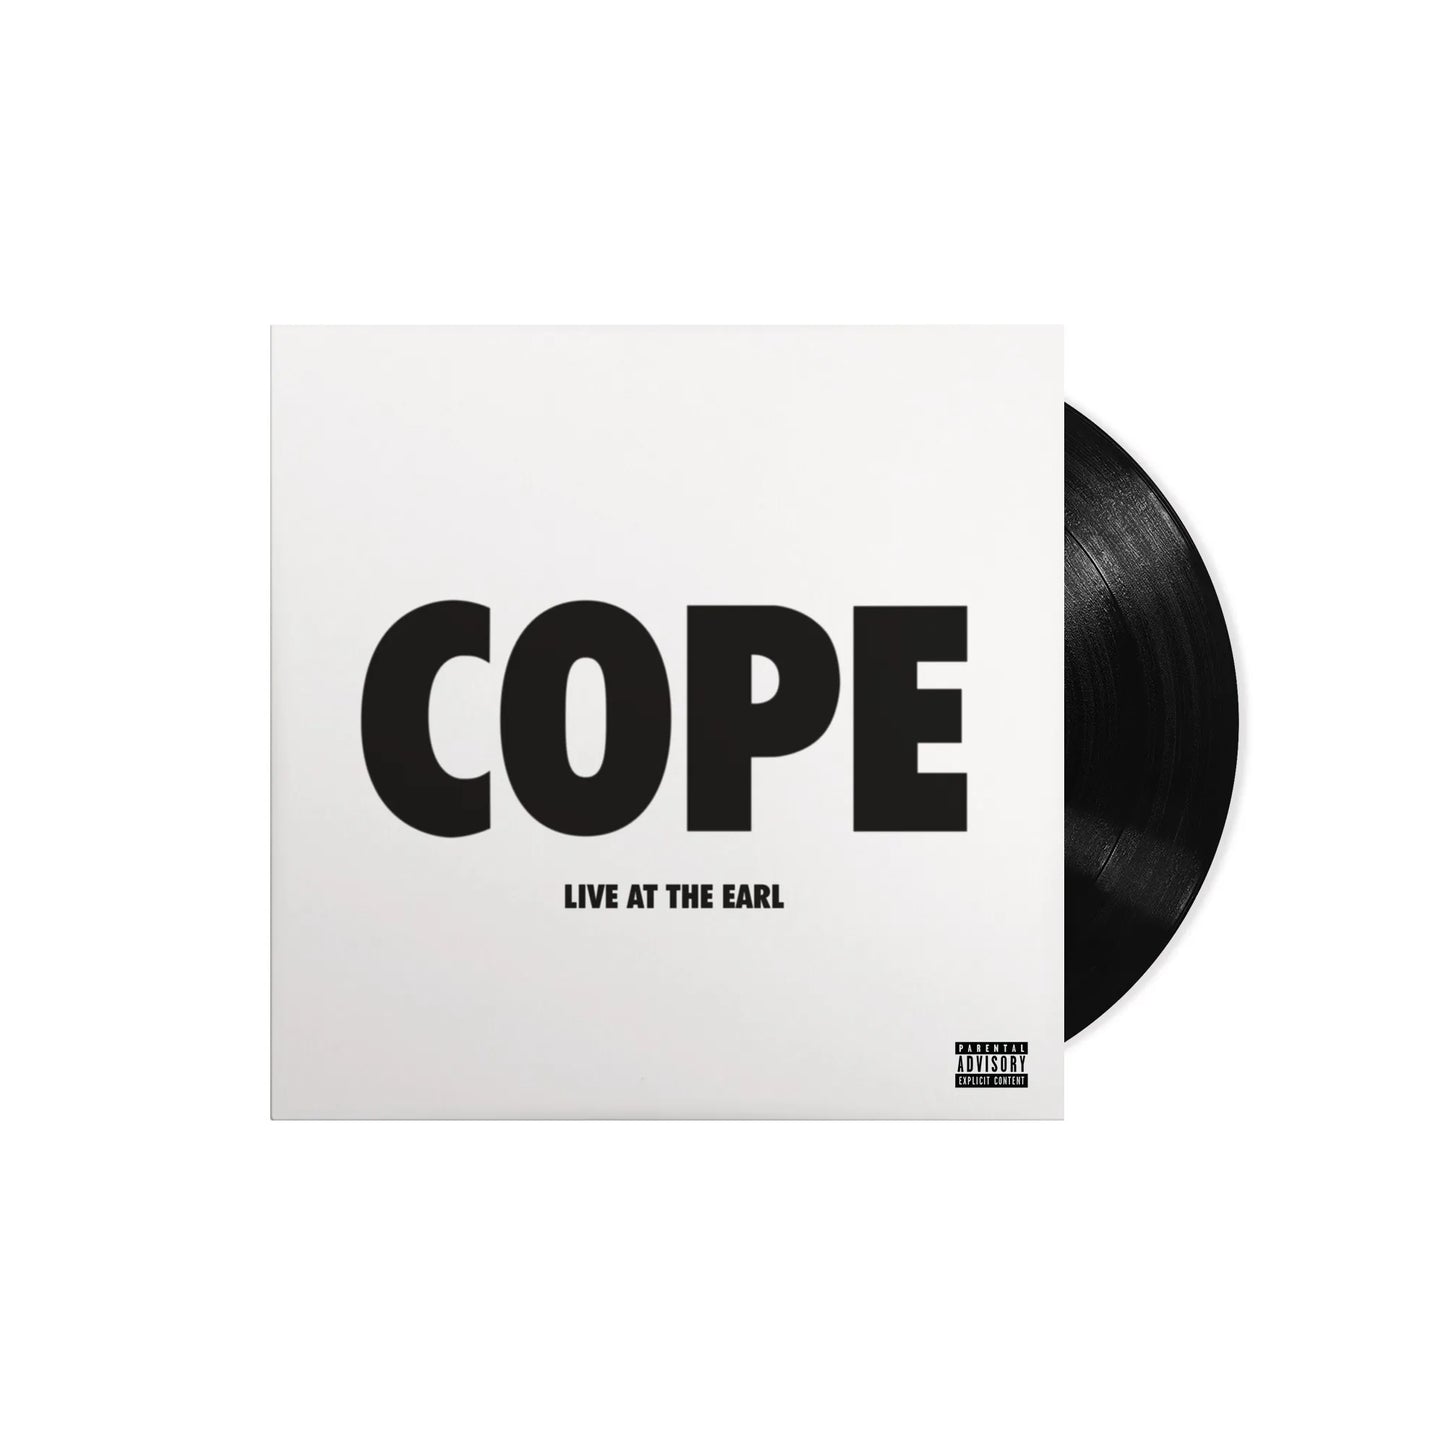 [Preorder Available Sept 6th] Manchester Orchestra - Cope Live At The Earl - LP (Standard Black Vinyl)